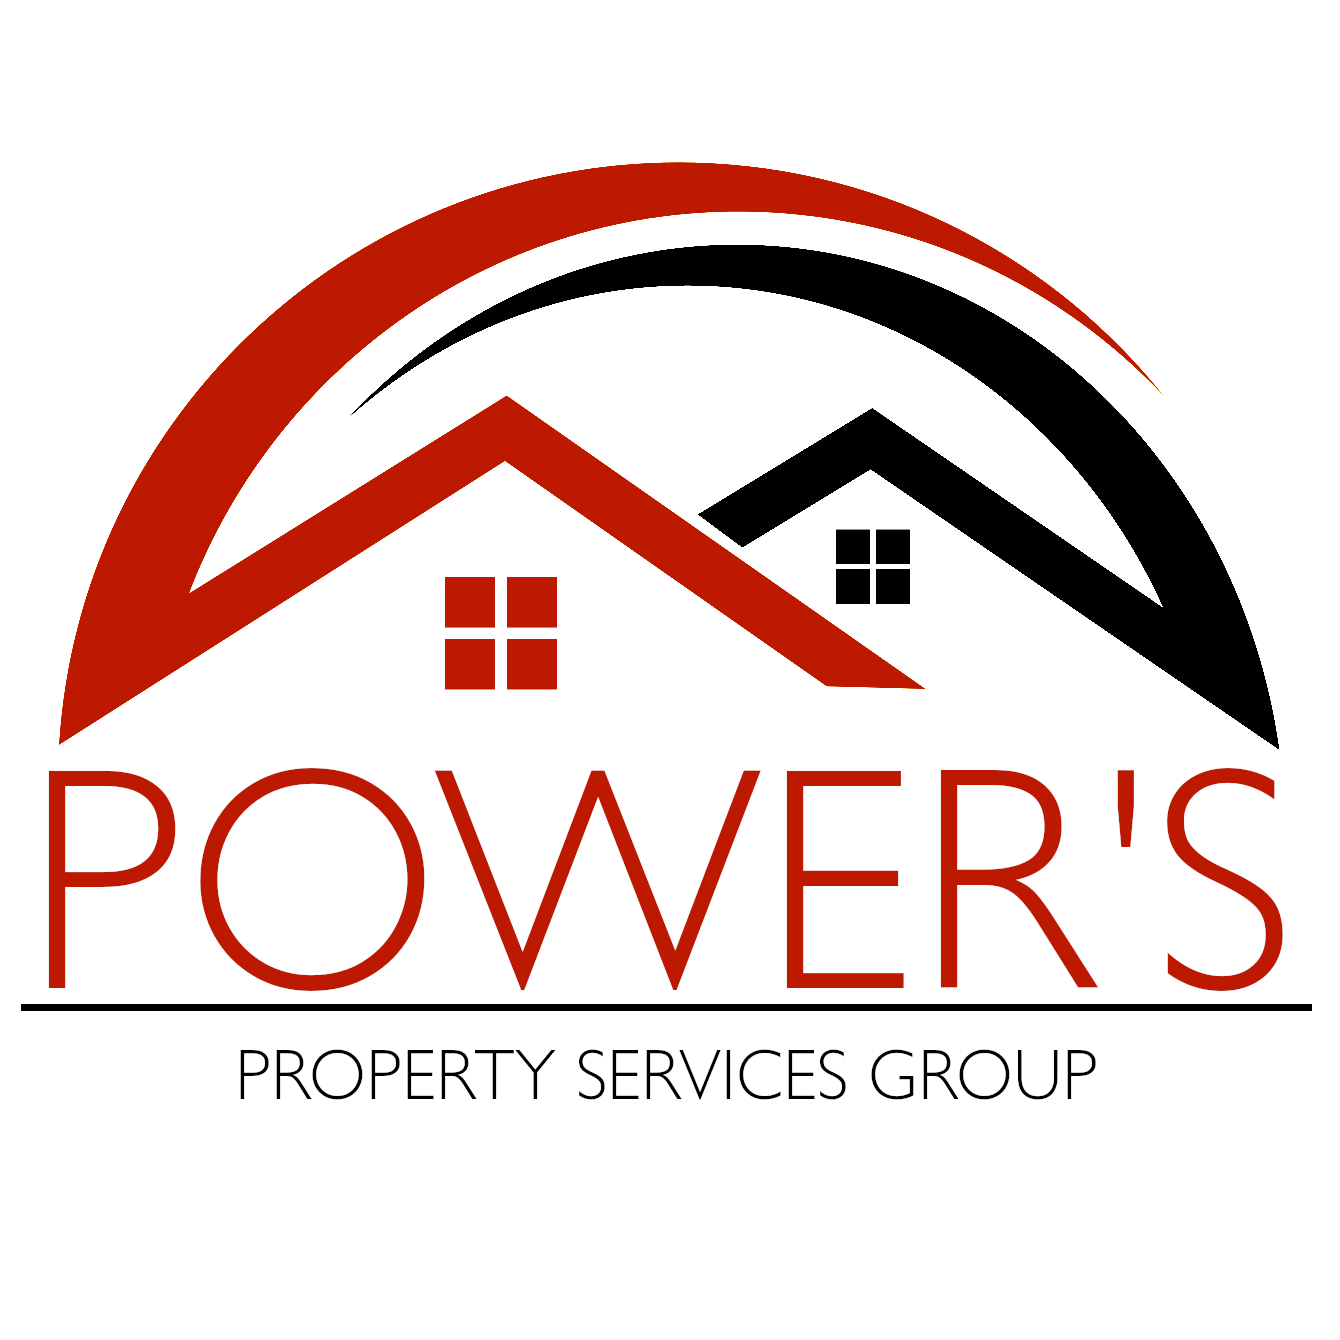 Power's Property Services Group